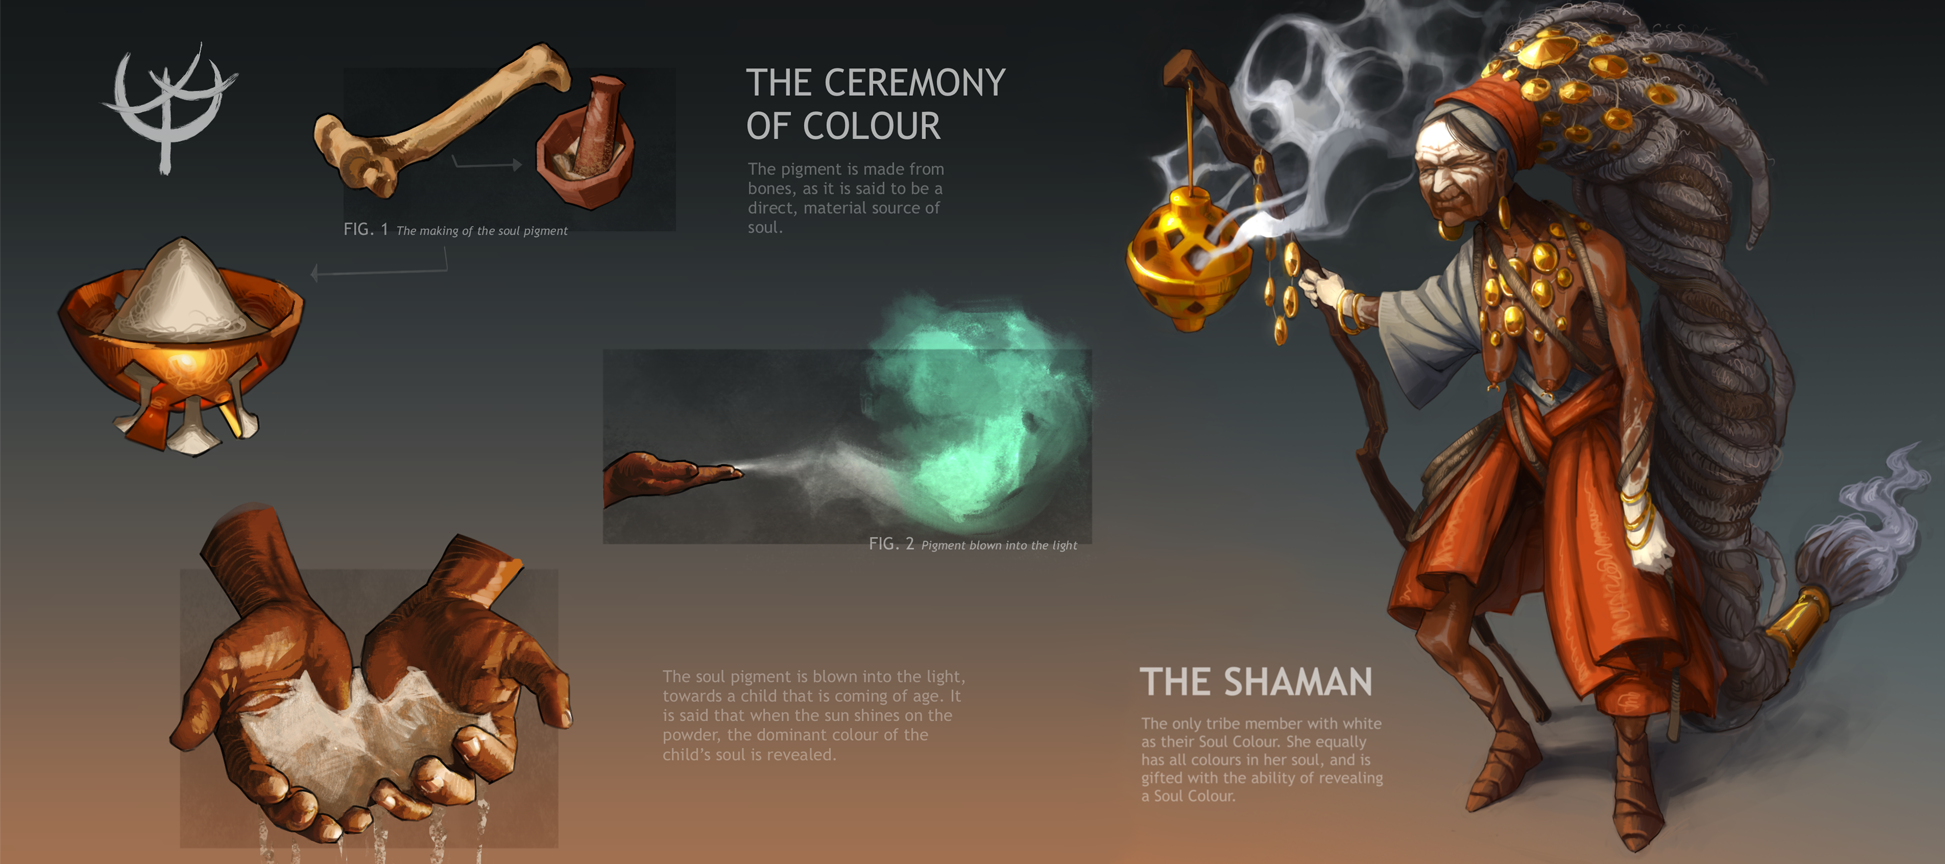 An infographic of the white pigment used in the ceremony of colour, and an illustrative piece of the Shaman who does it.